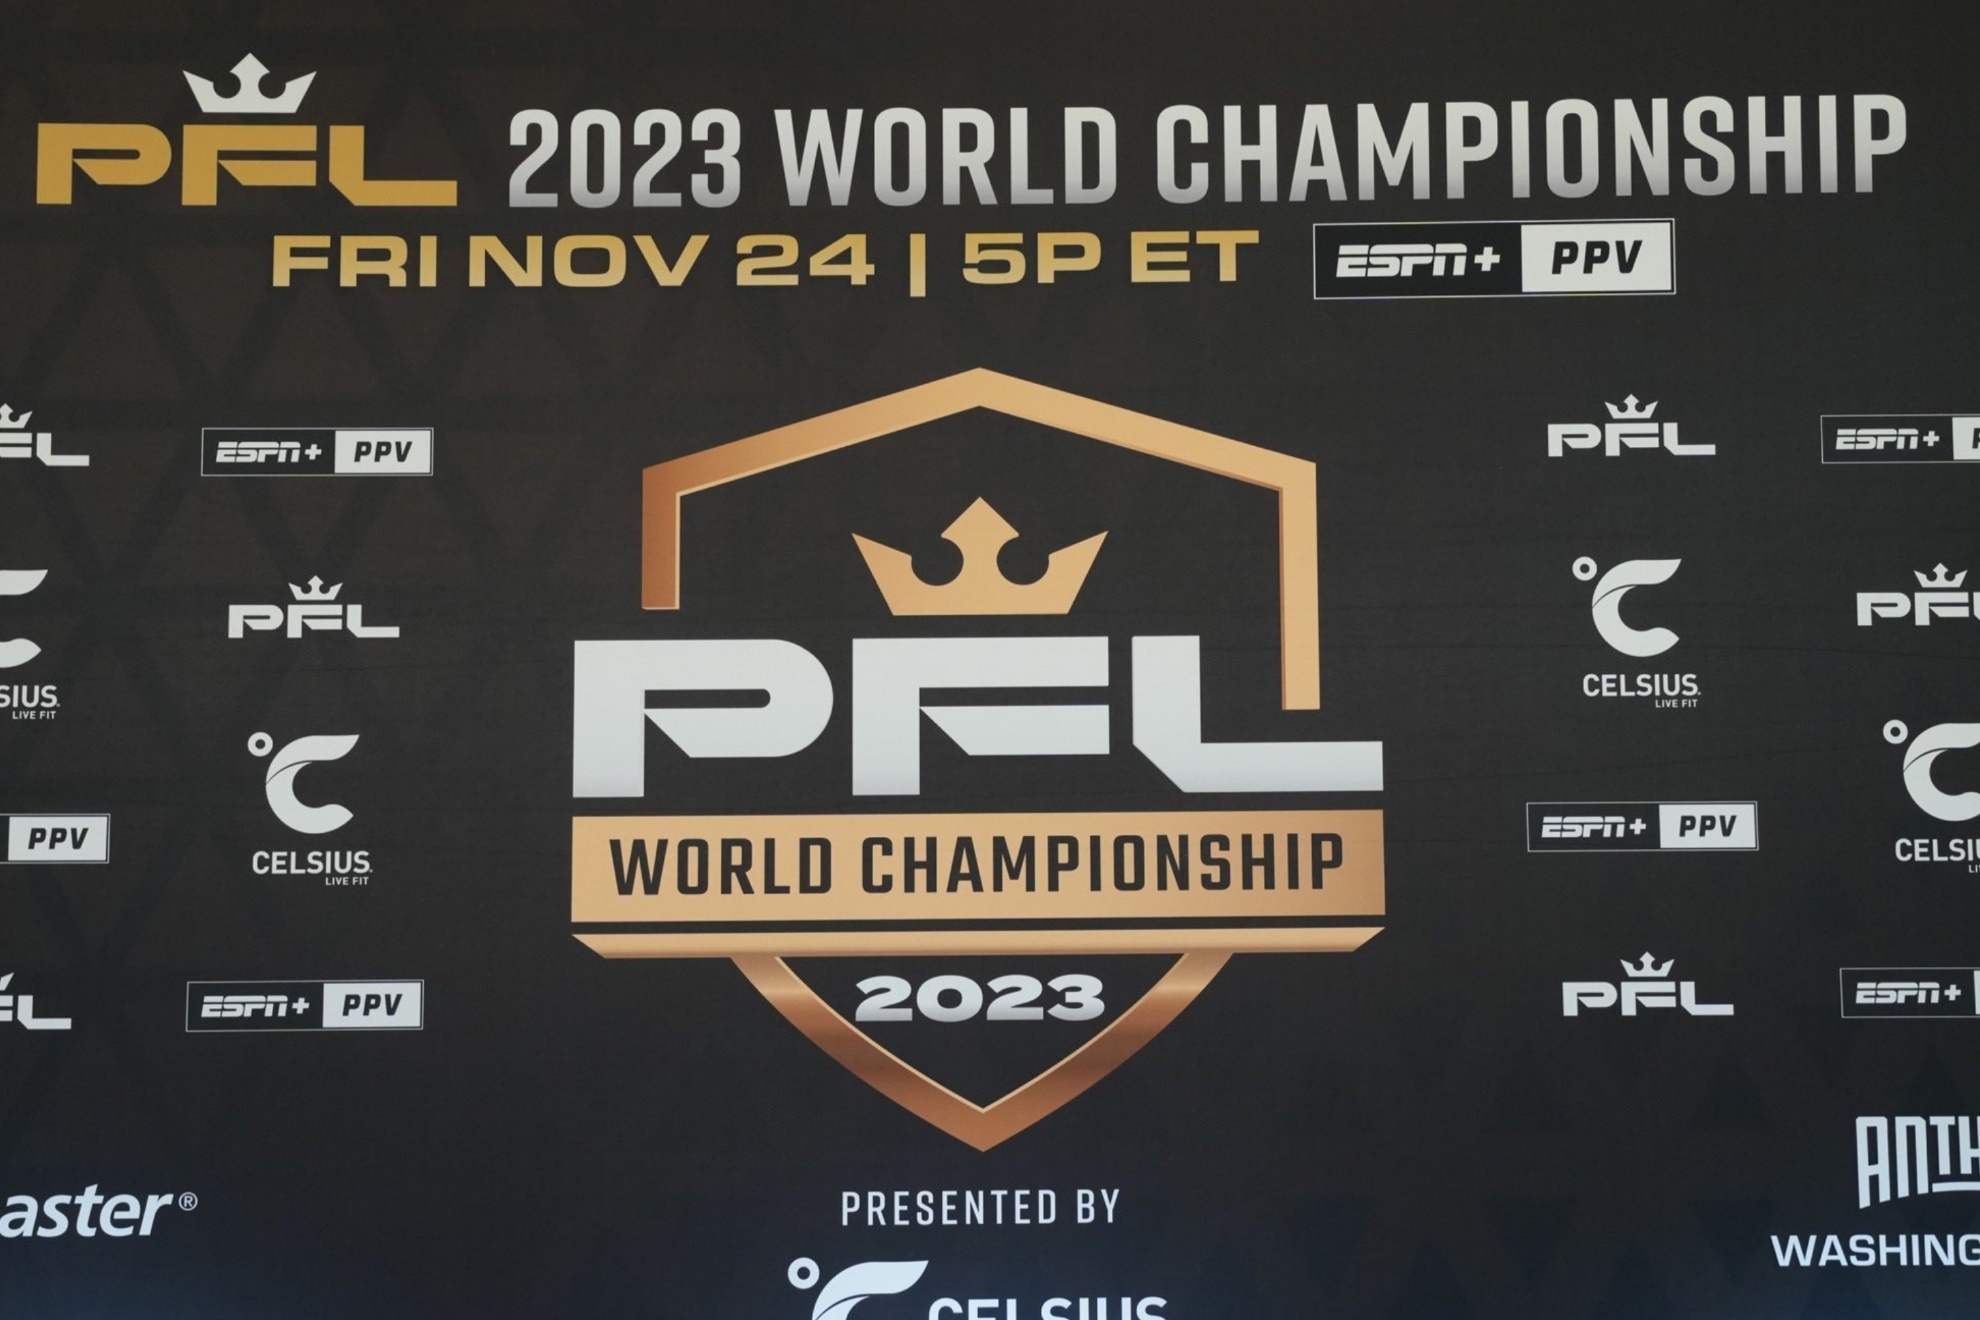 The PFL 2023 World Championships will take place this Friday